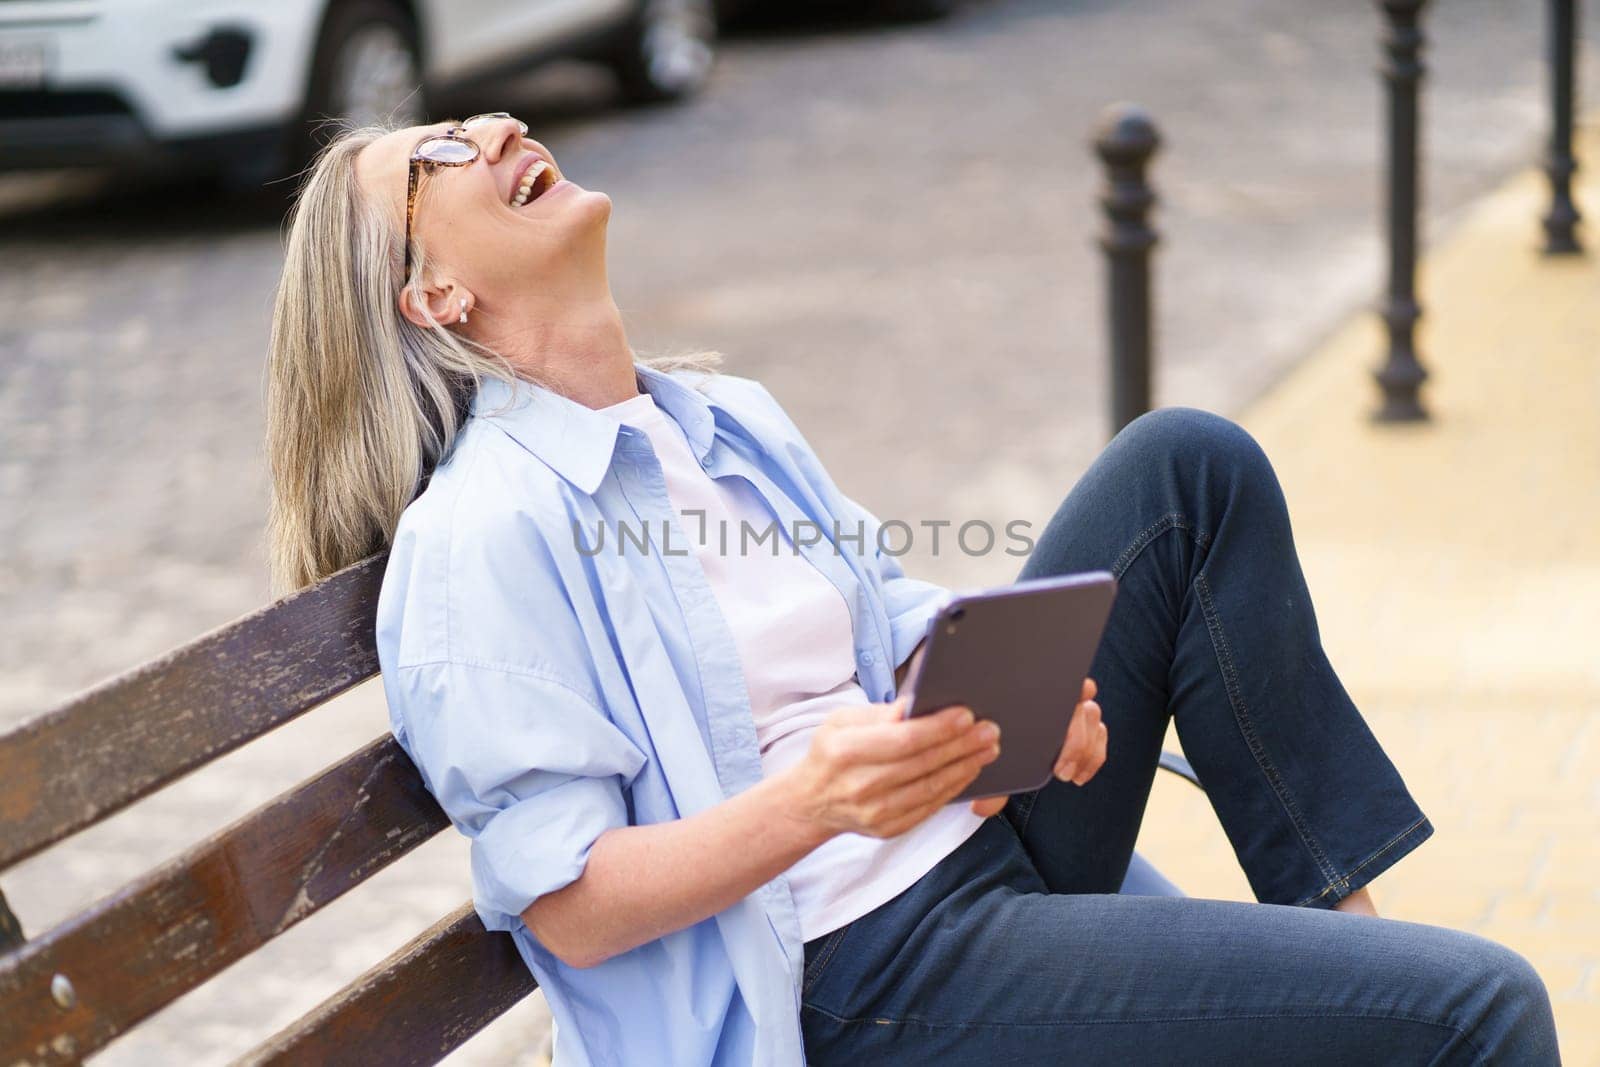 A woman sitting on a bench, gazing upwards at an object or view in front of her.